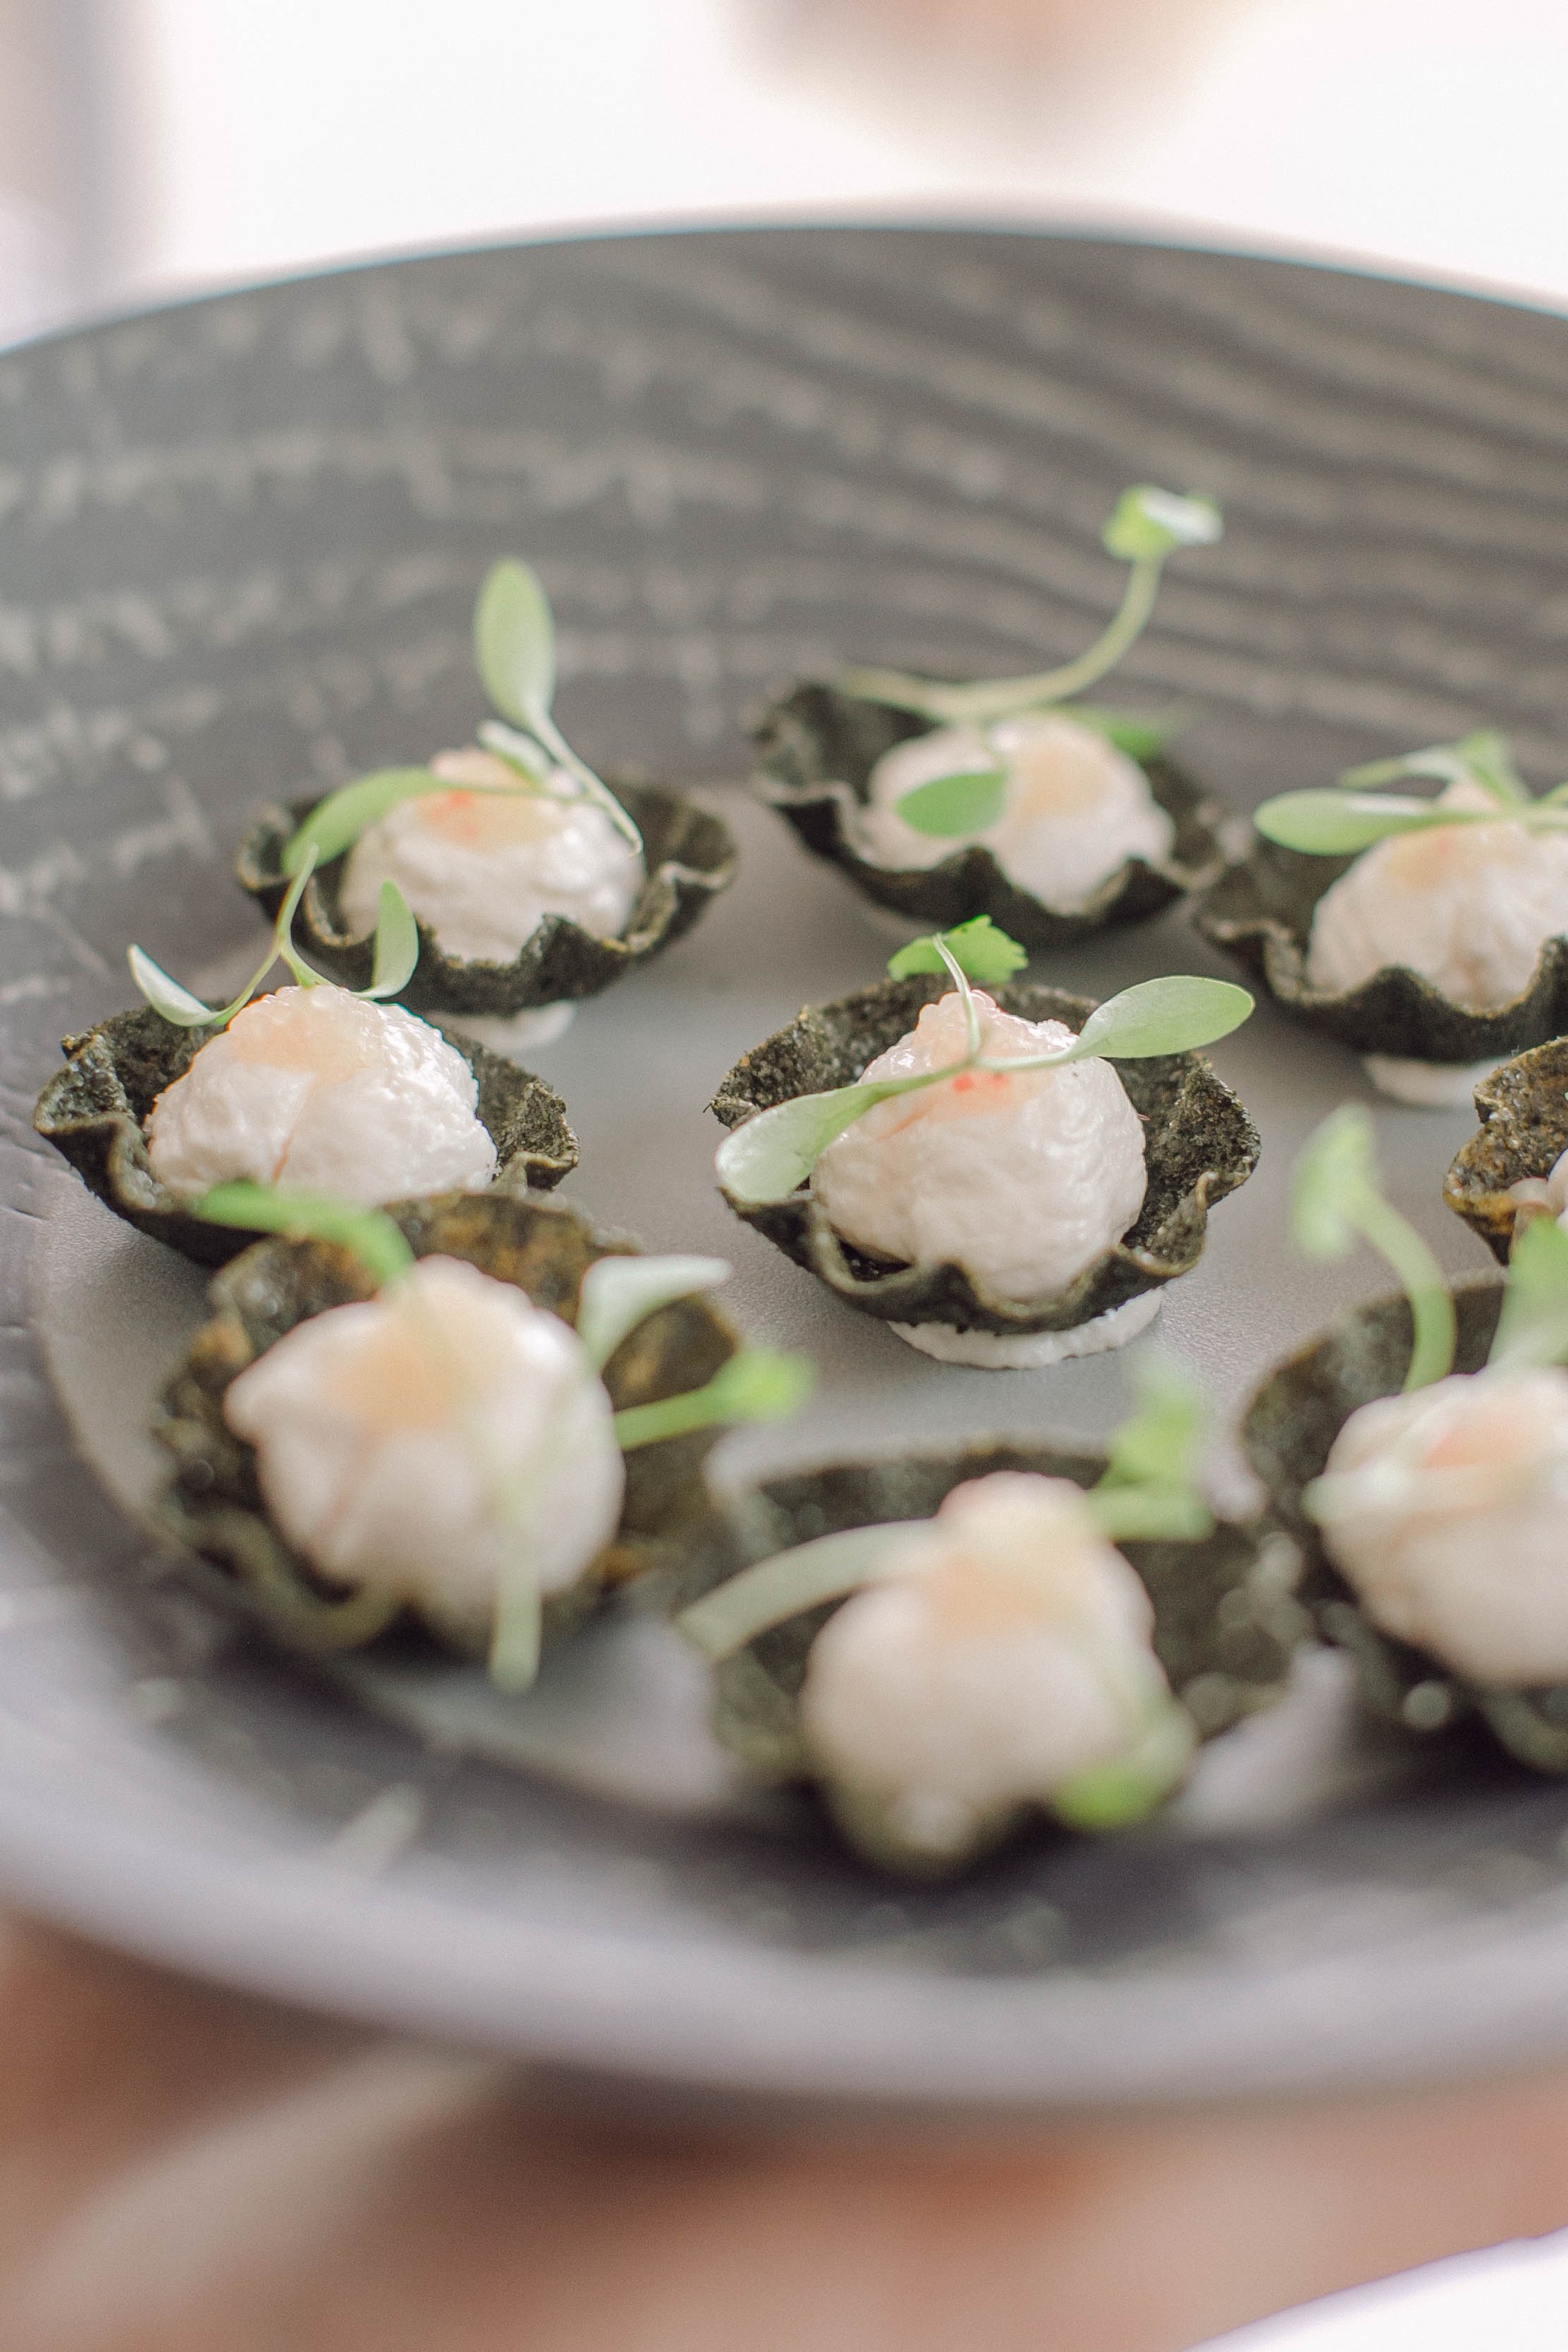 Canapes in a bowl at a private event catered by Marcus Belgravia